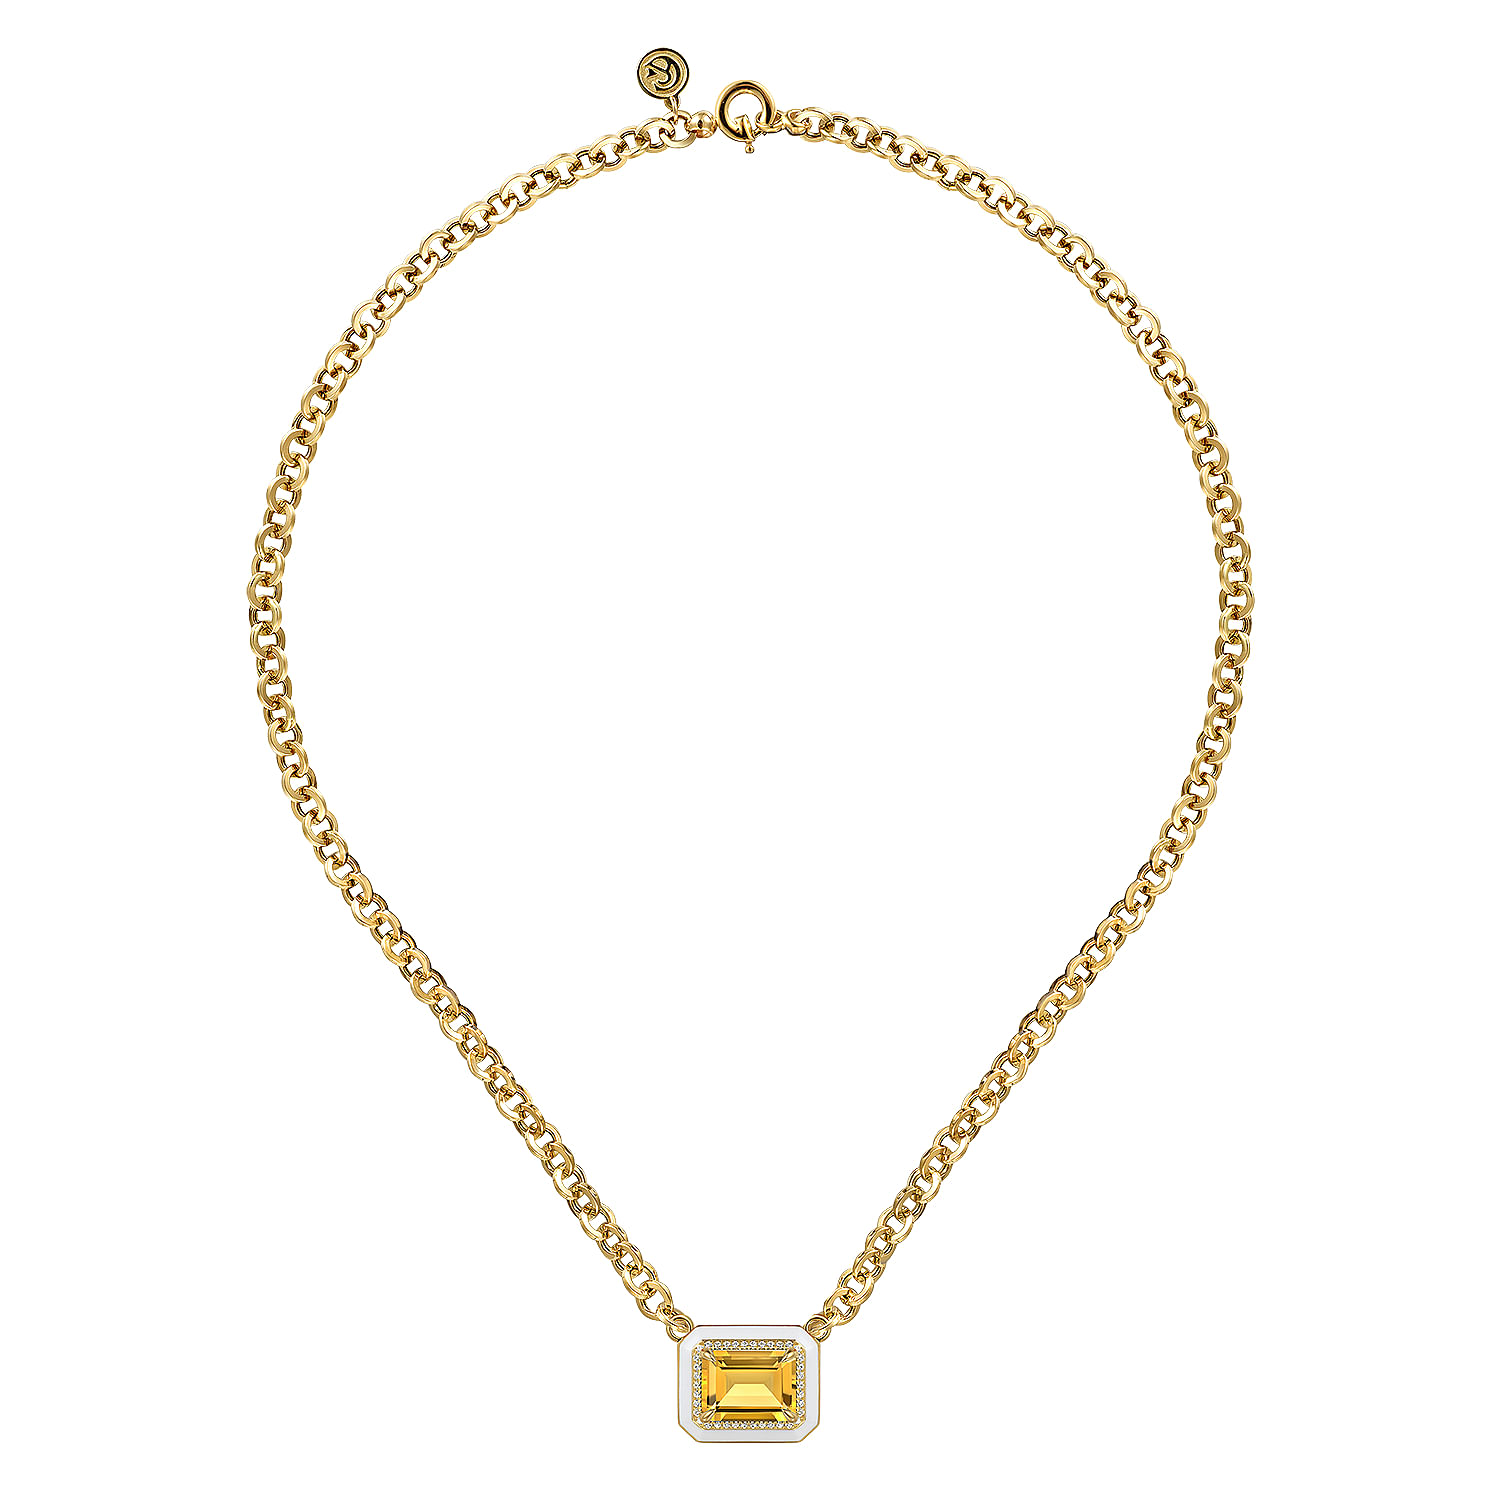 14K Yellow Gold Diamond and Citrine Emerald Cut Necklace With Flower Pattern J-Back and White Enamel